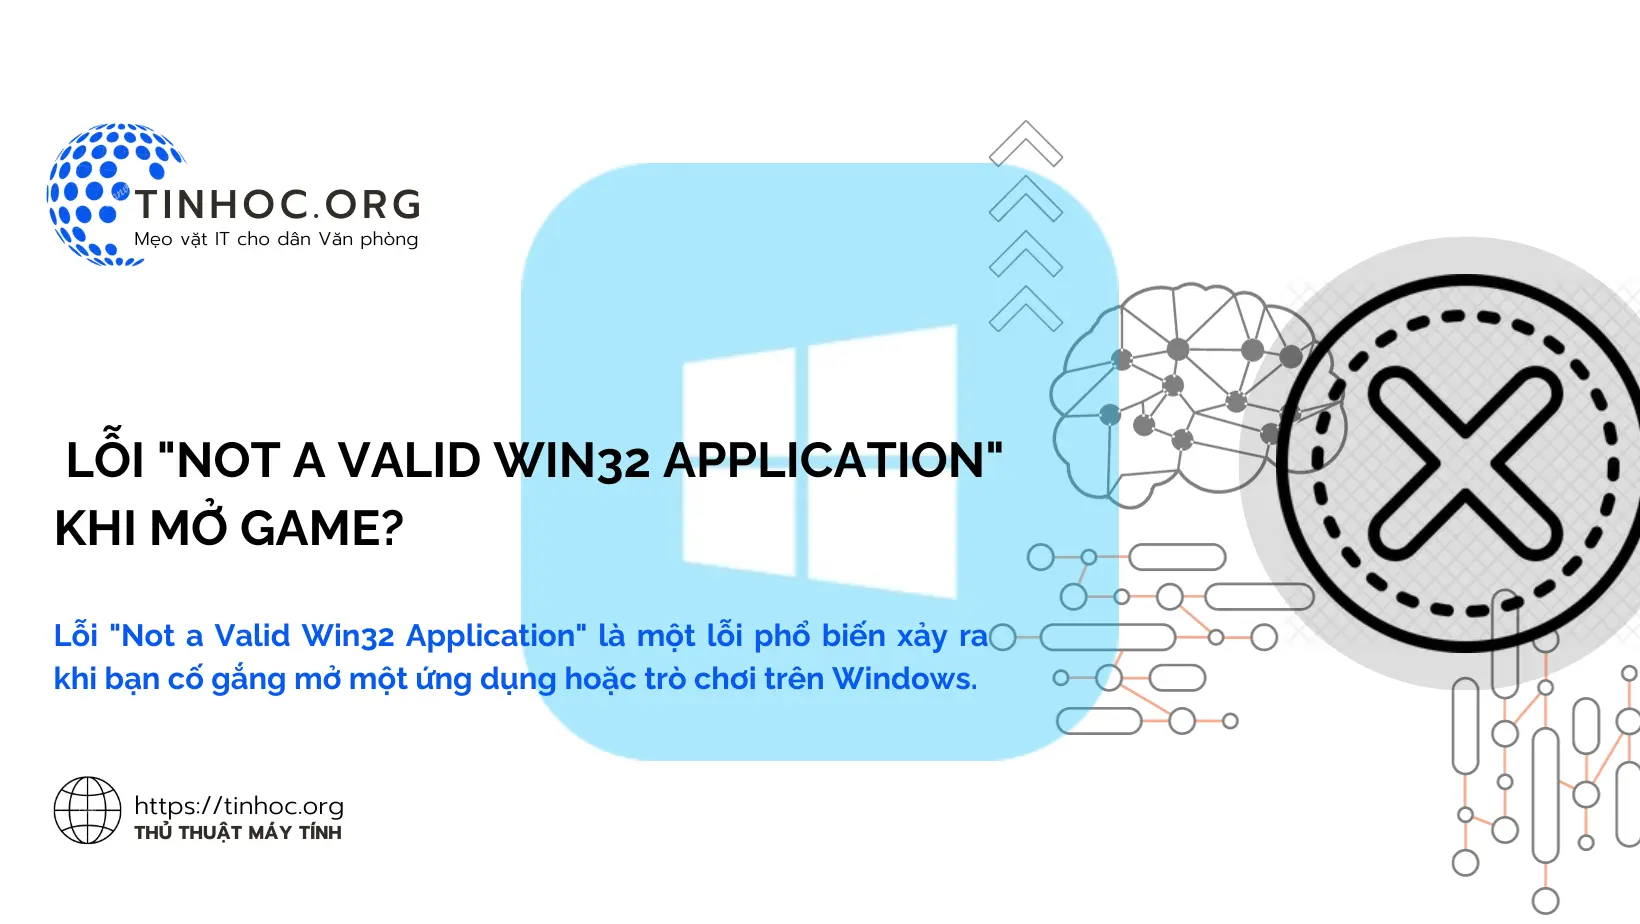 Lỗi "Not a Valid Win32 Application" khi mở Game?